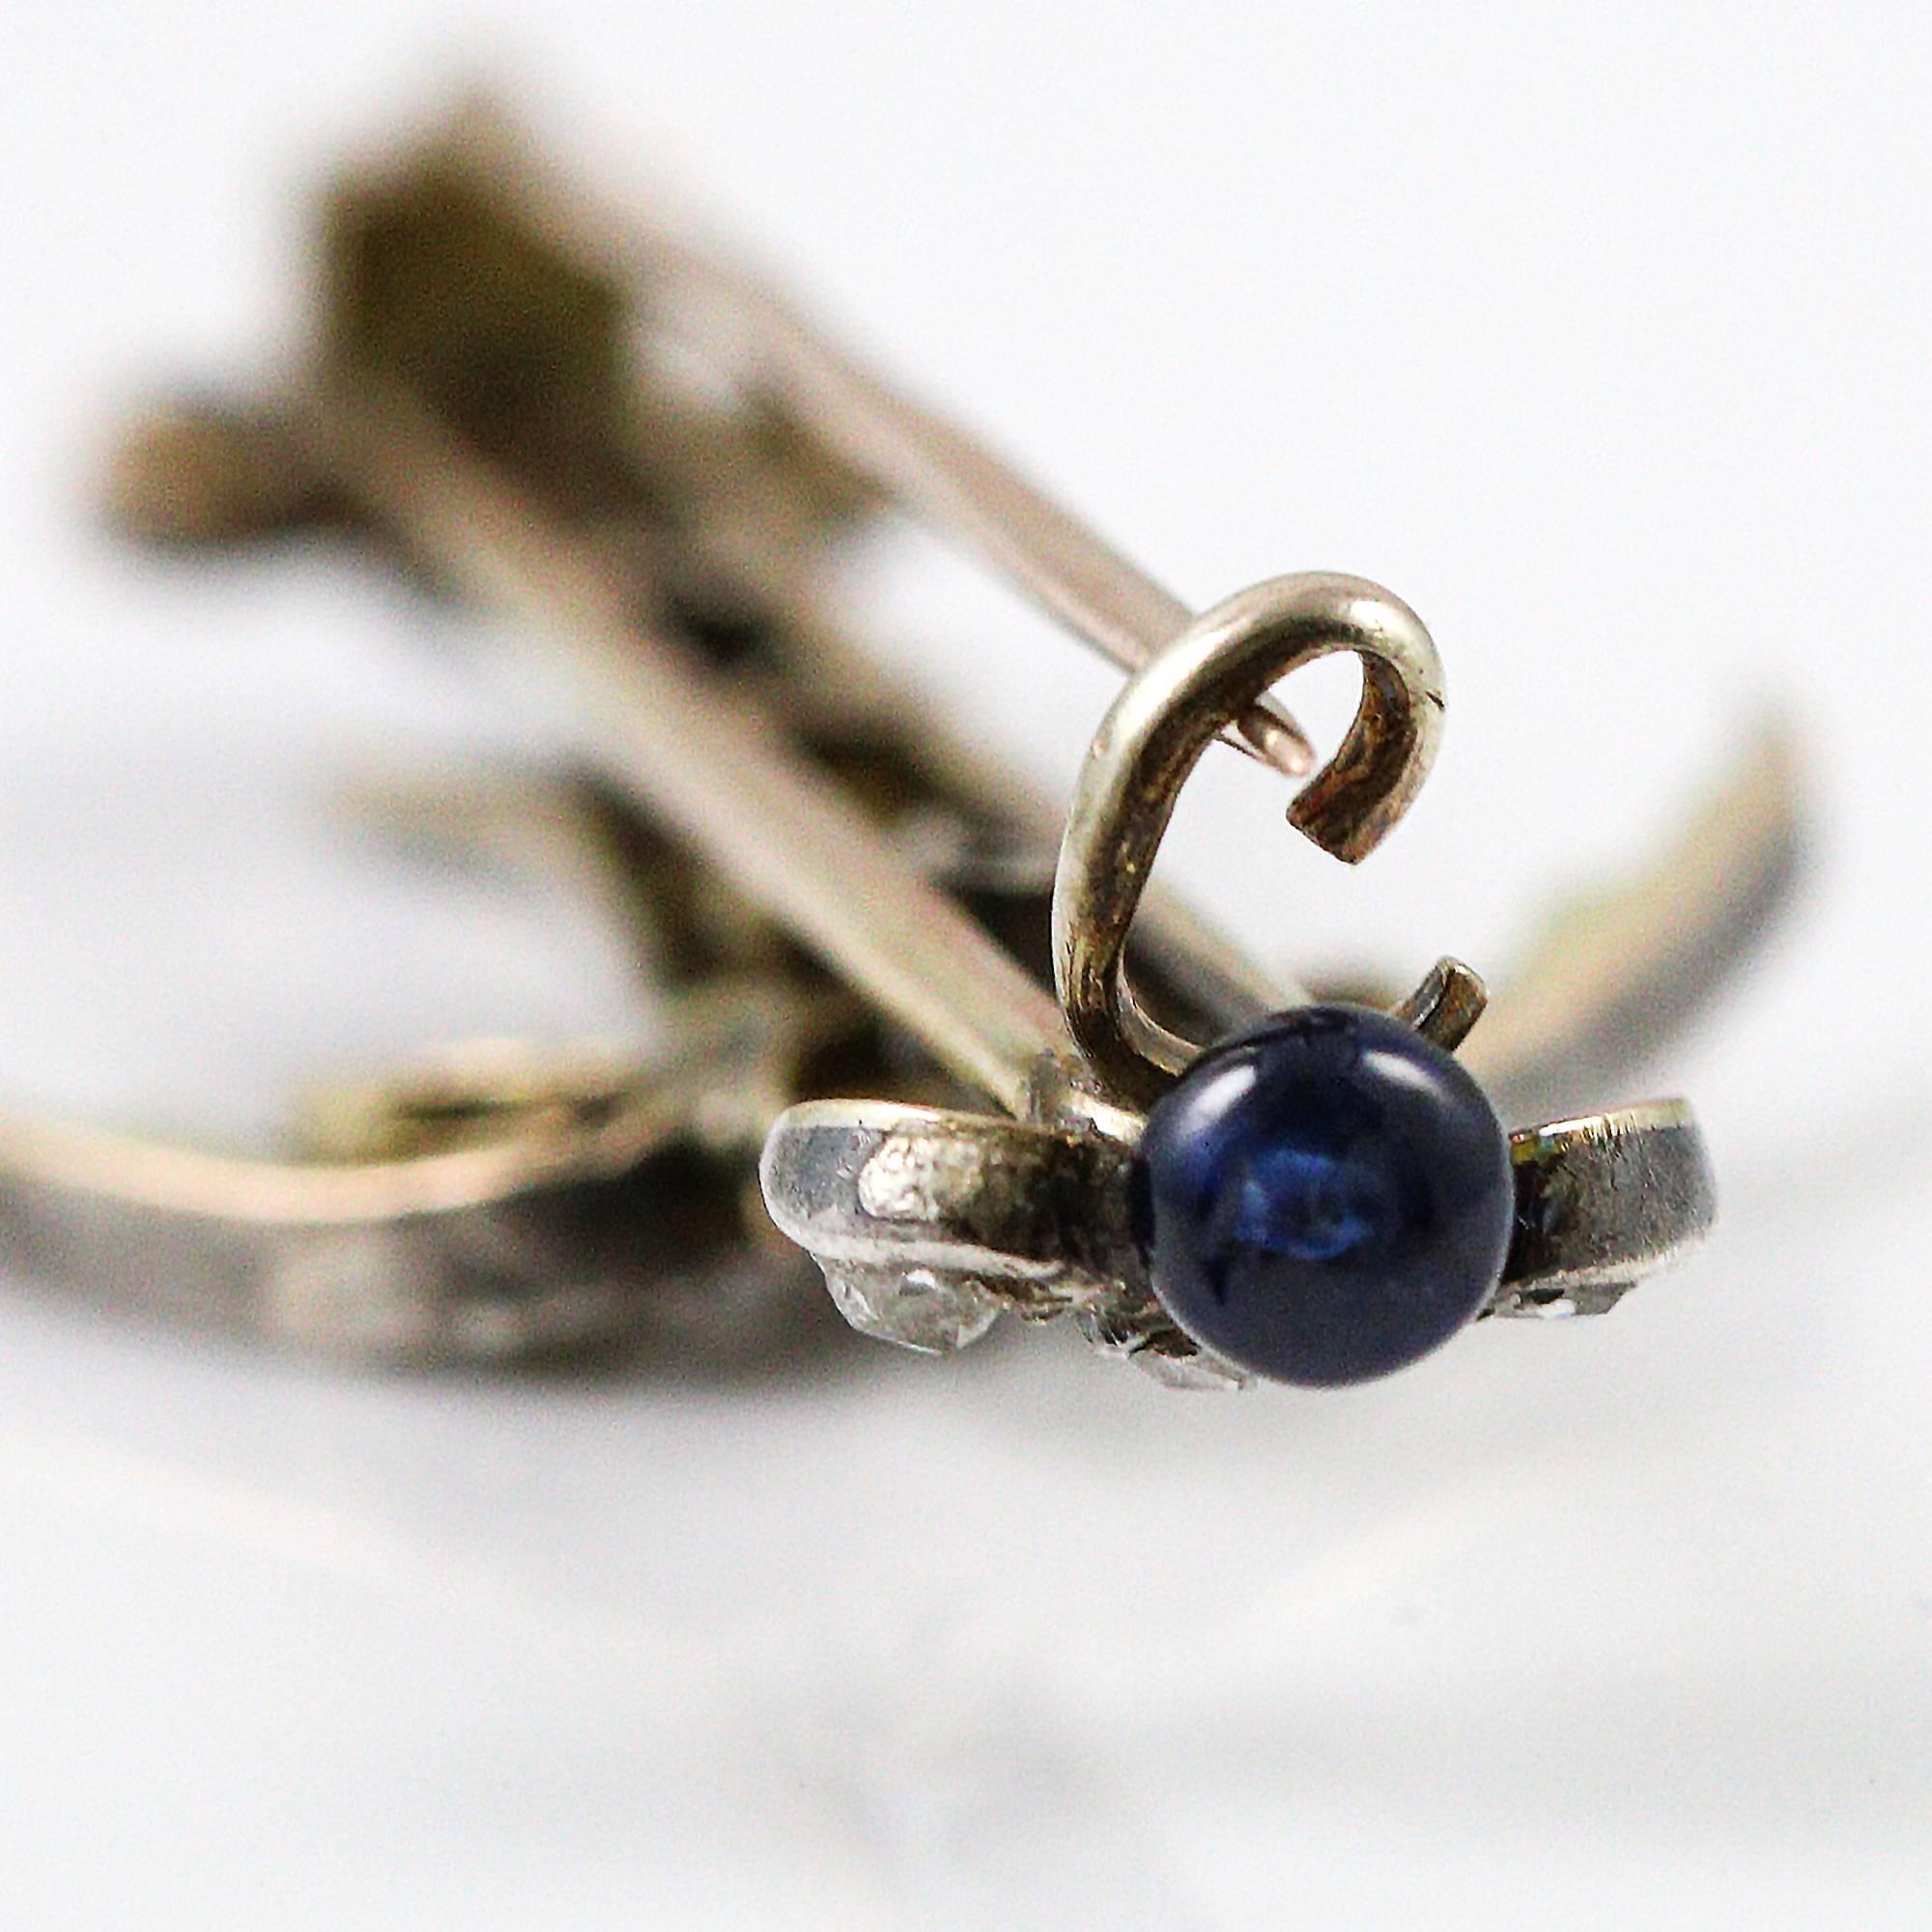 High Victorian Victorian Sterling Silver and 10k Gold Swallow Brooch with Diamonds and Sapphire